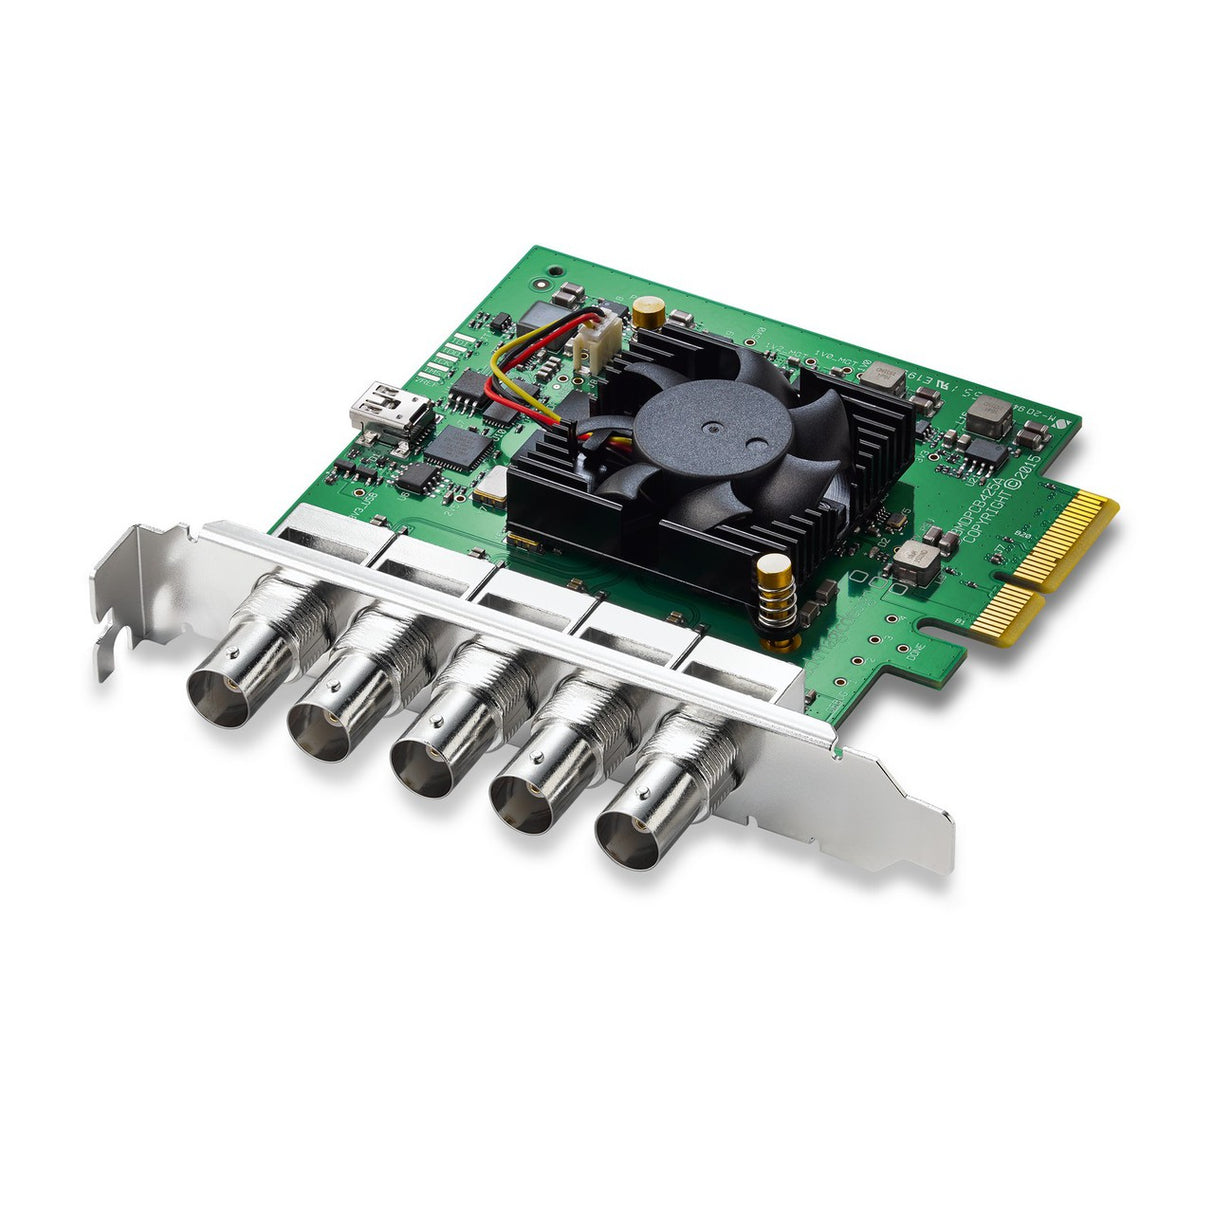 Blackmagic Design Decklink Duo 2 4 Independent 3G-SDI Connections PCIe Capture Playback Card (Used)